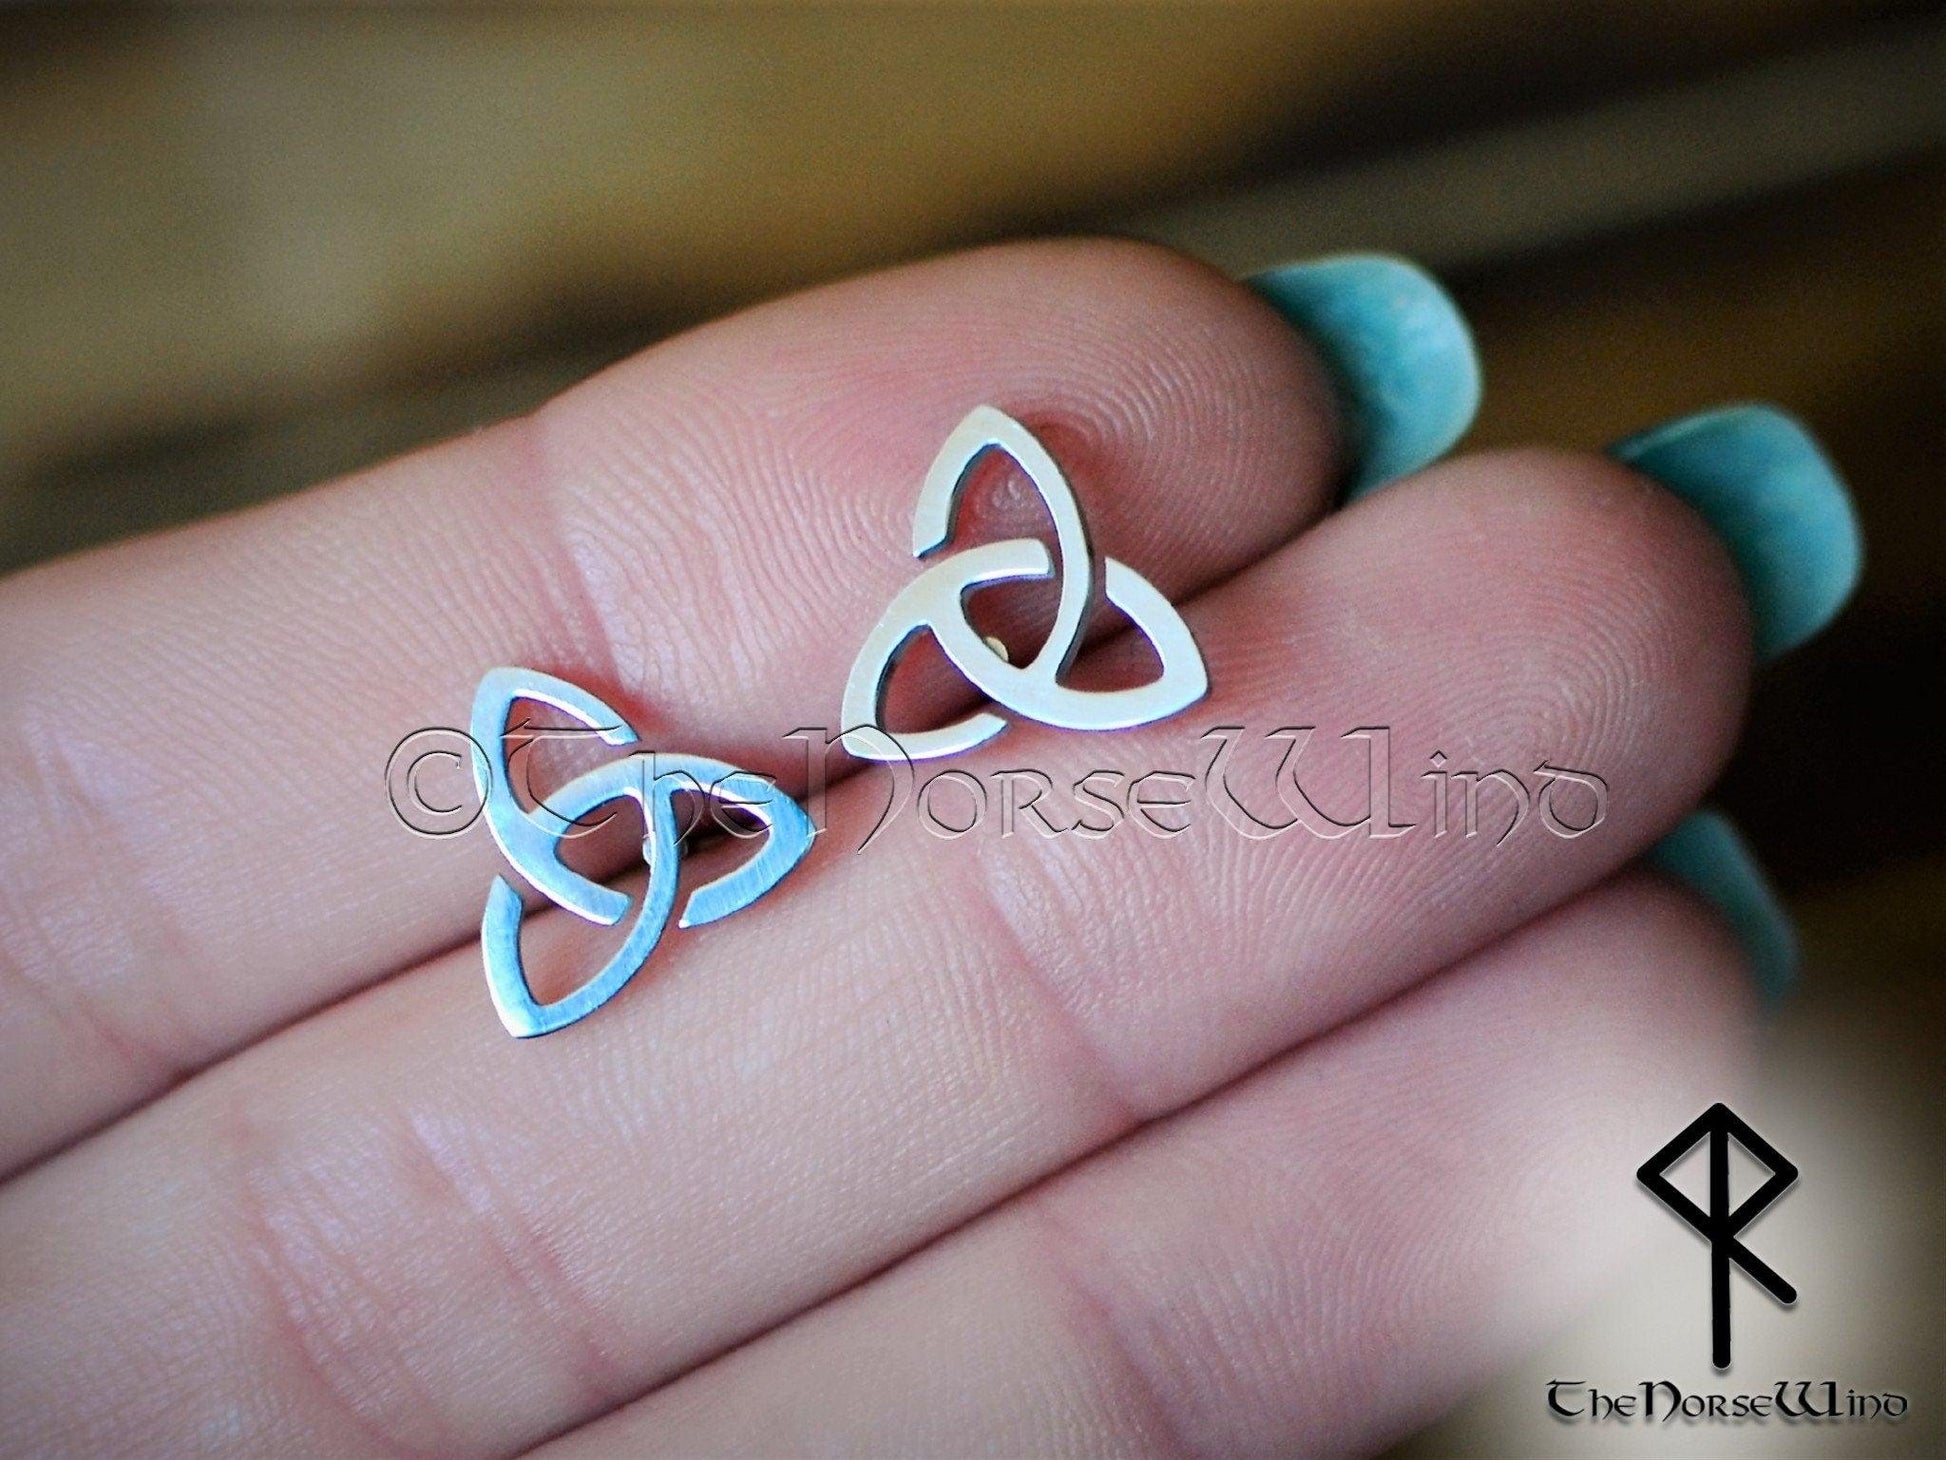 Triquetra Earrings - Celtic Knot Viking Studs, 316L Stainless Steel - TheNorseWind